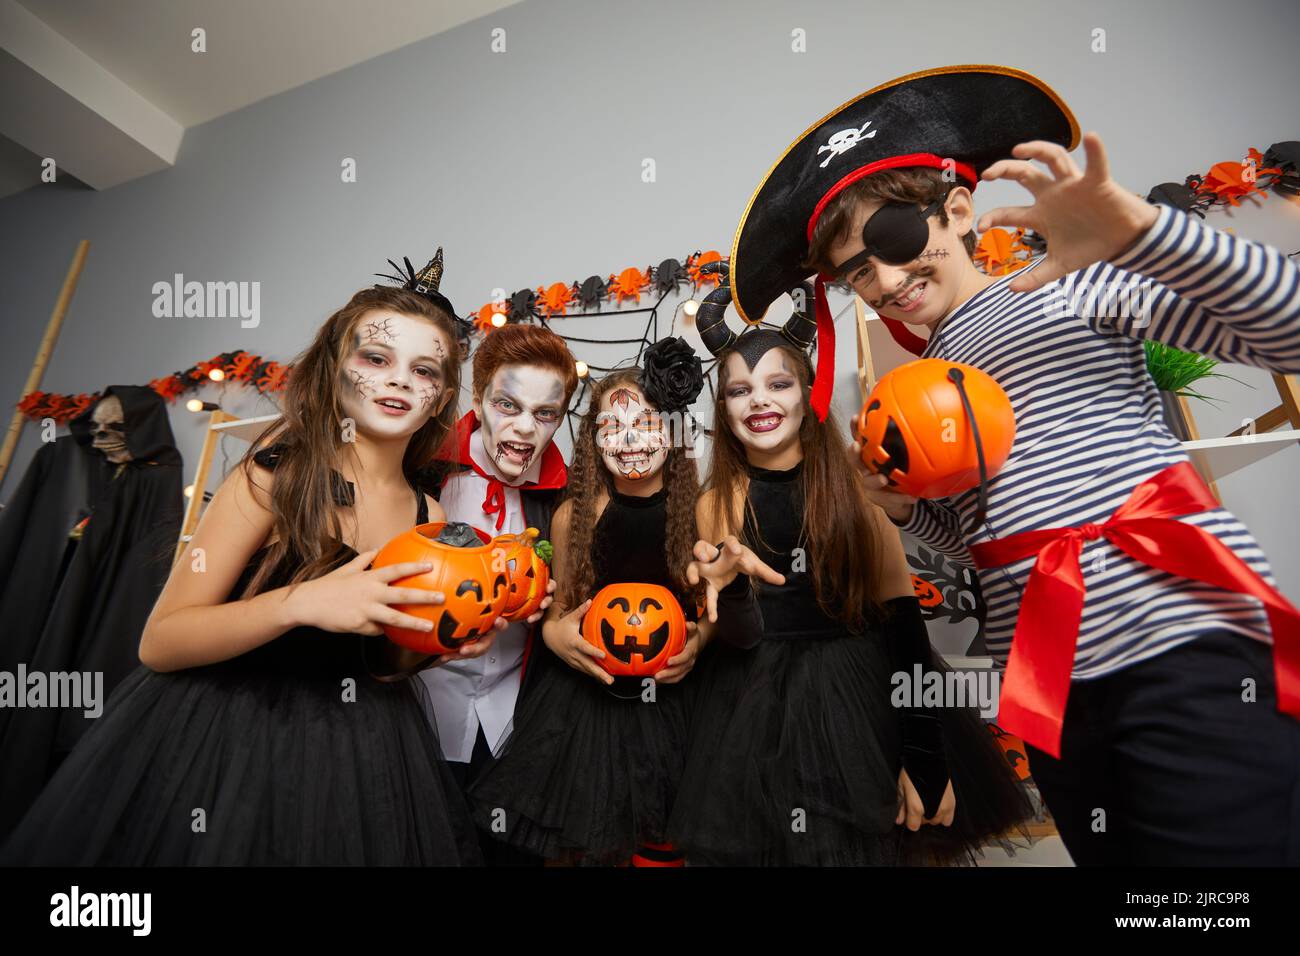 Group of children friends in carnival costumes and with spooky makeup at Halloween celebration. Stock Photo